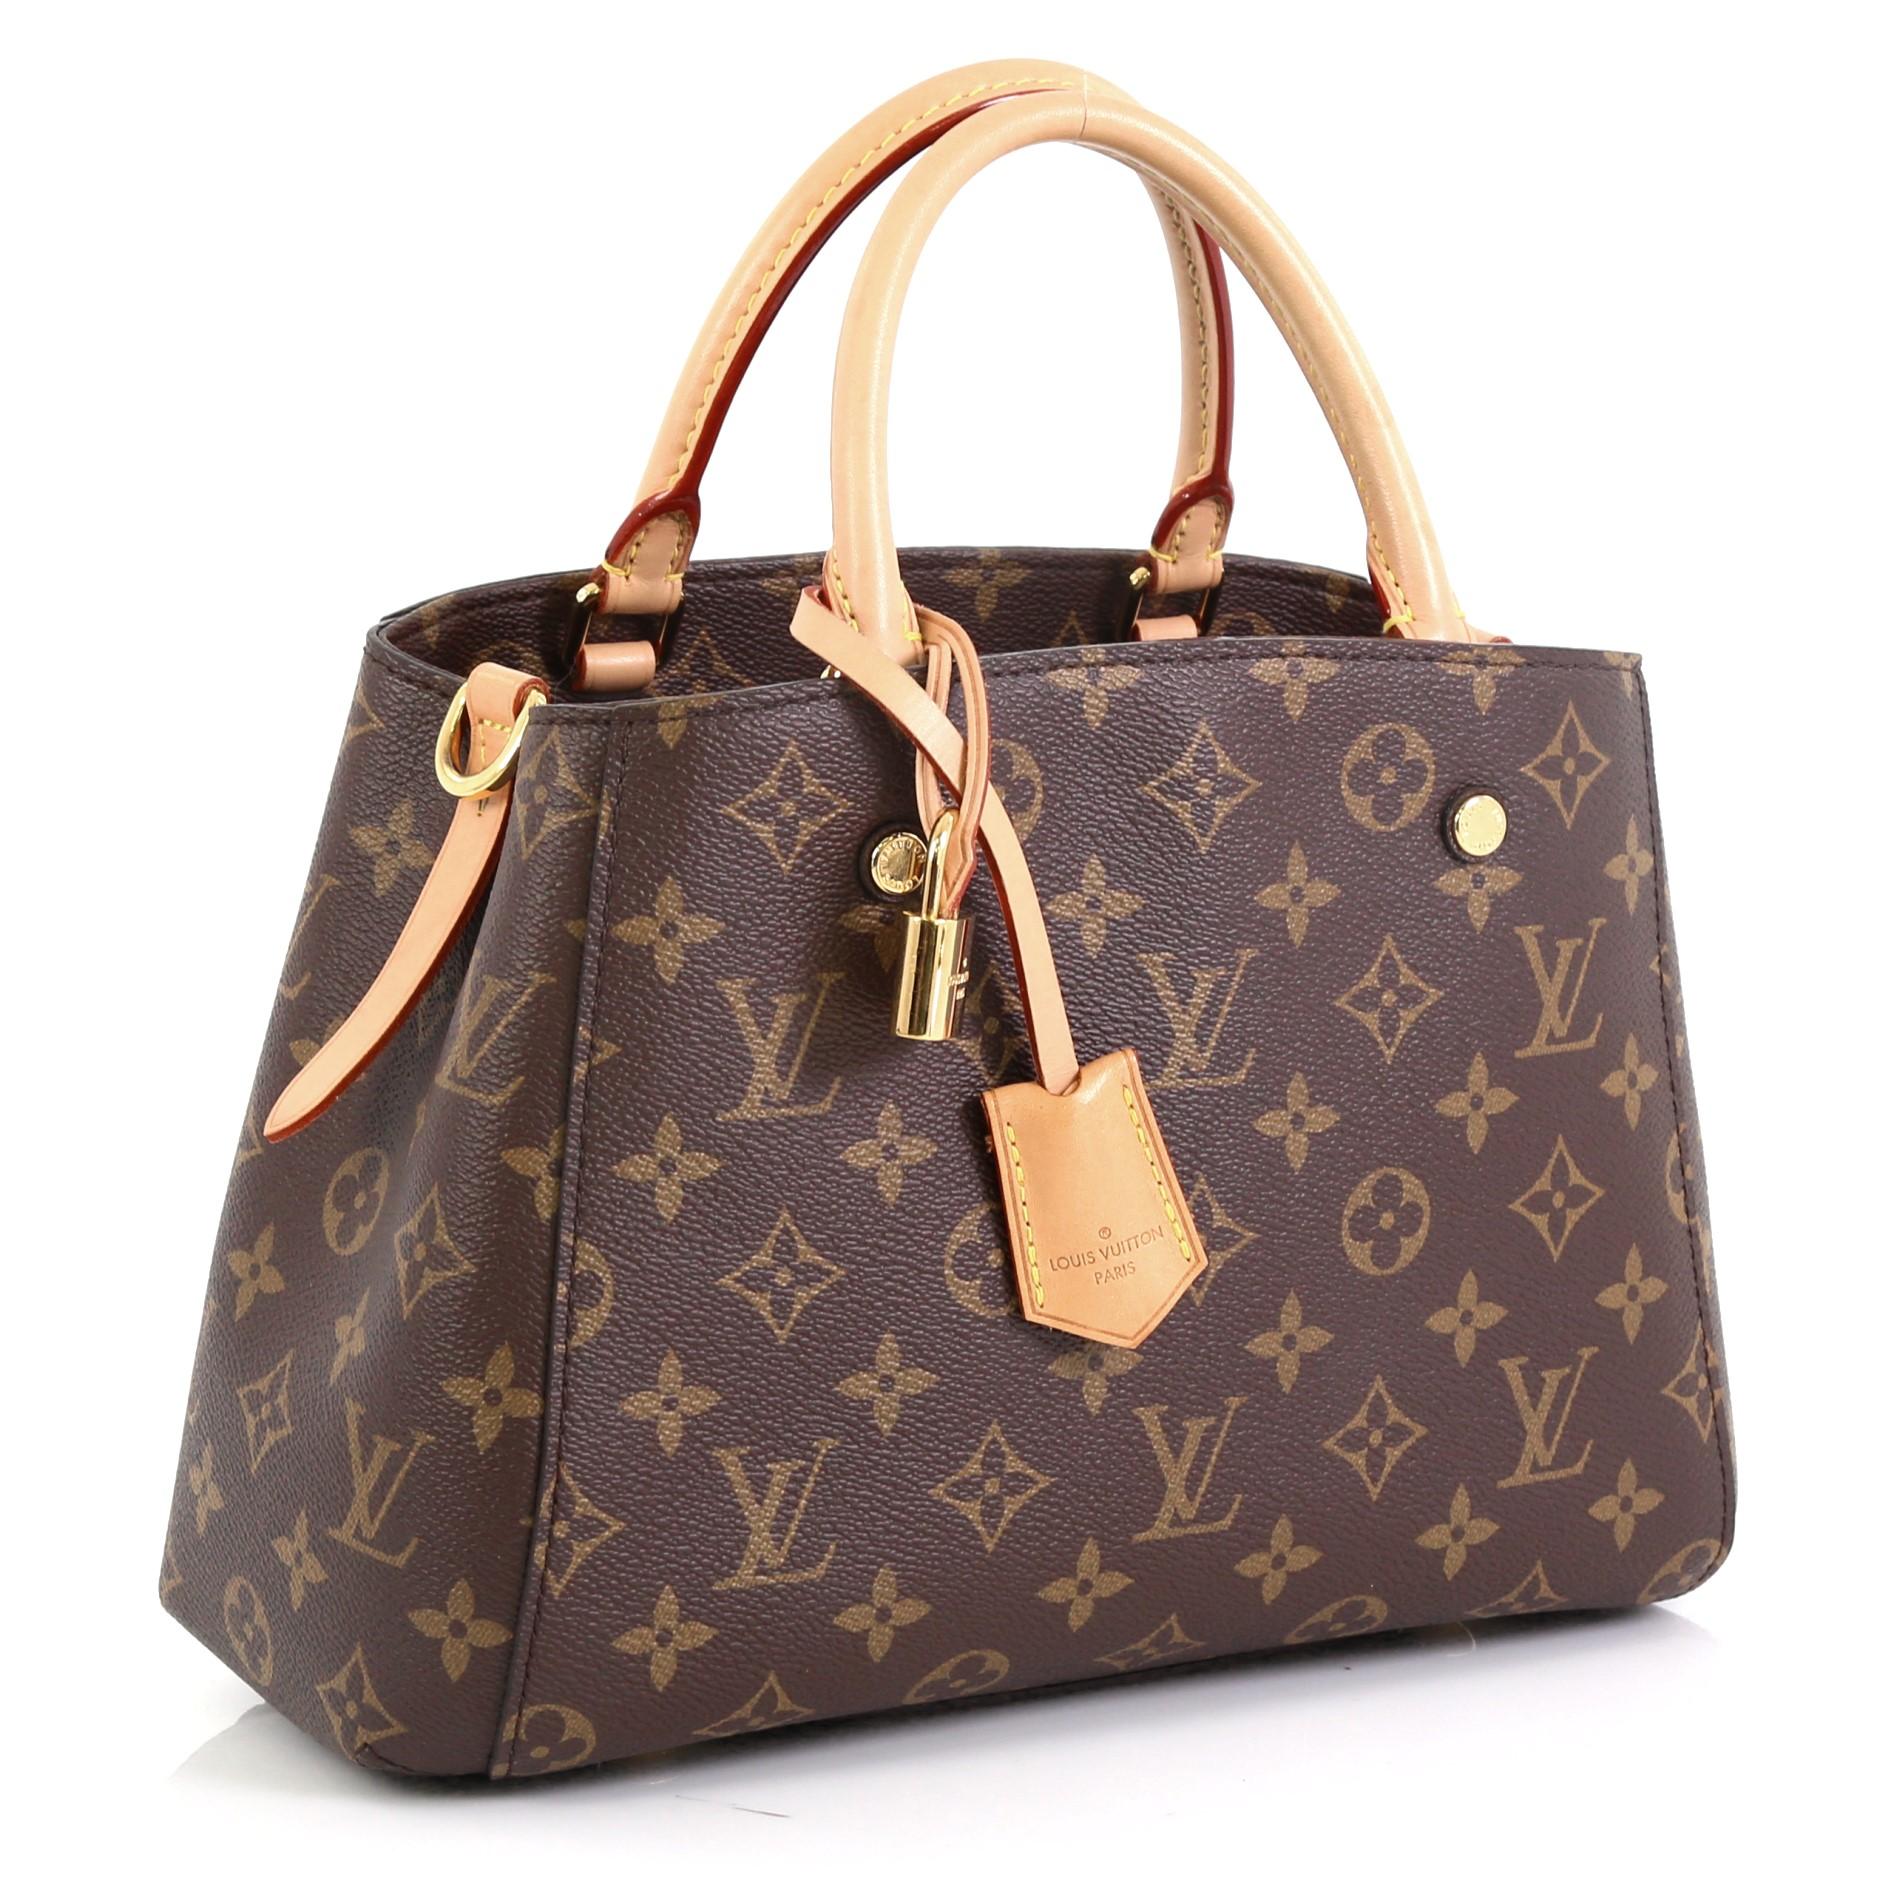 This Louis Vuitton Montaigne Handbag Monogram Canvas BB, crafted in brown monogram coated canvas, features dual rolled vachetta leather handles, protective base studs, and gold-tone hardware. Its hook closure opens to a purple microfiber interior